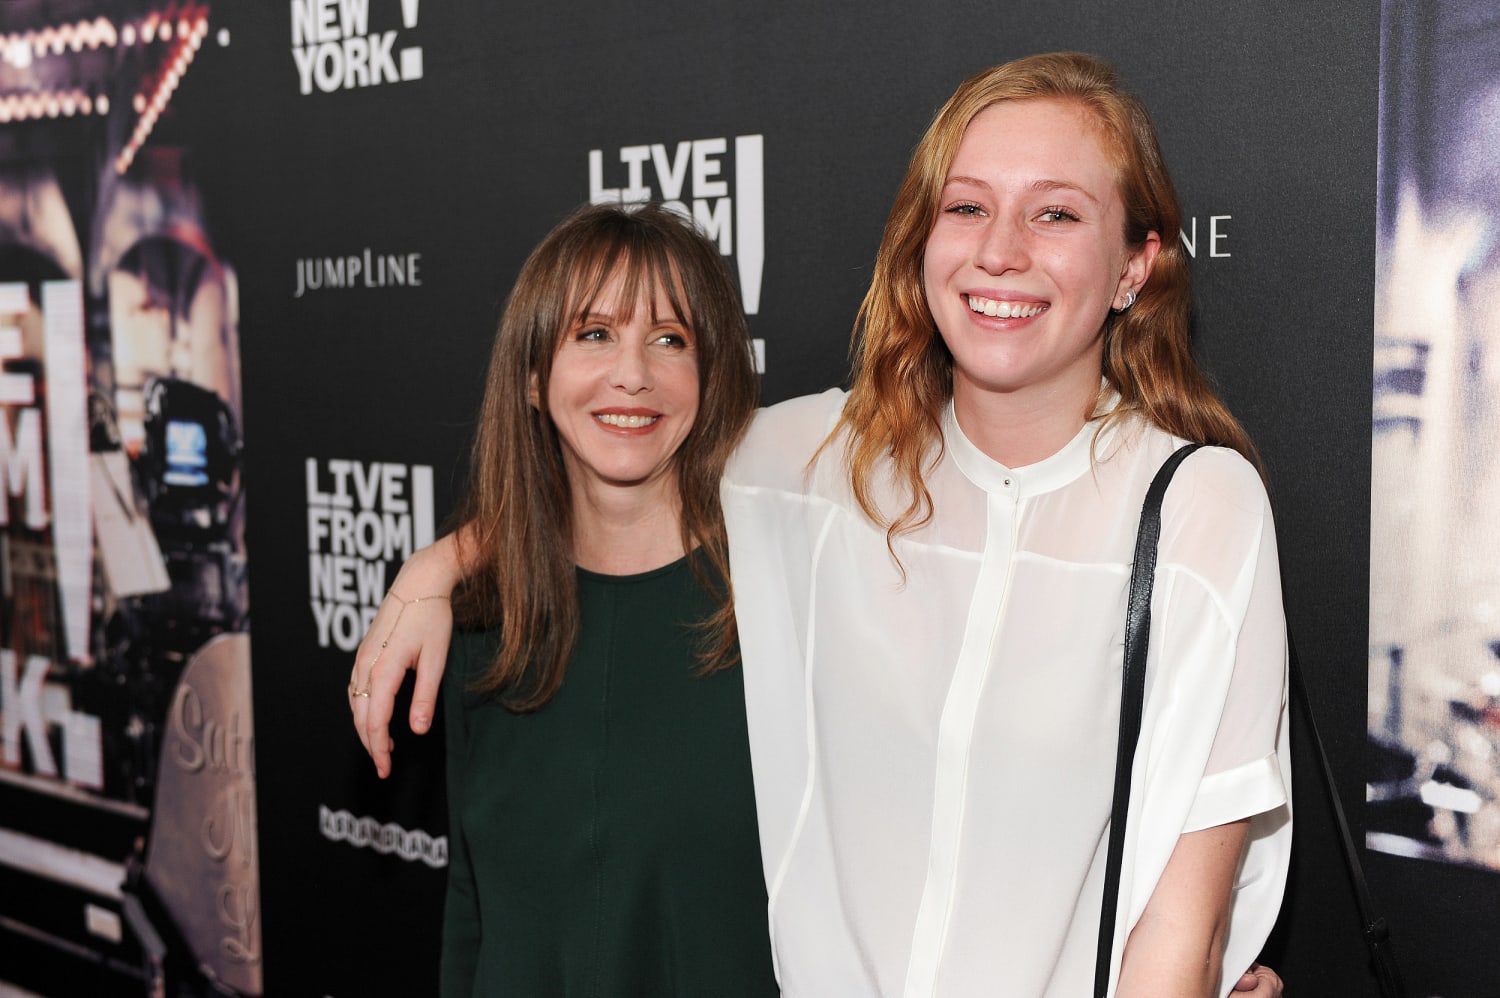 'Hacks' star Hannah Einbinder shares pics of mom Laraine Newman reacting to her cover story